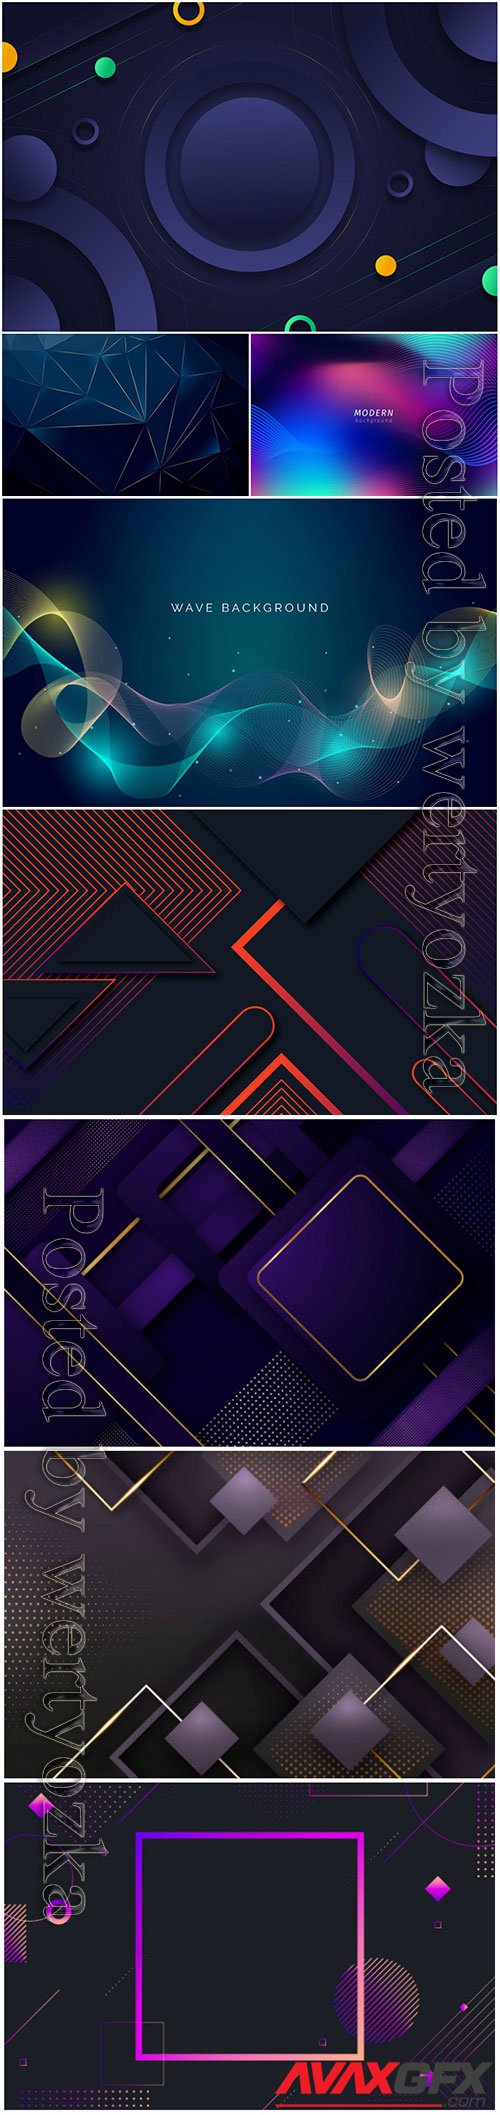 Luxury abstract backgrounds in vector # 8